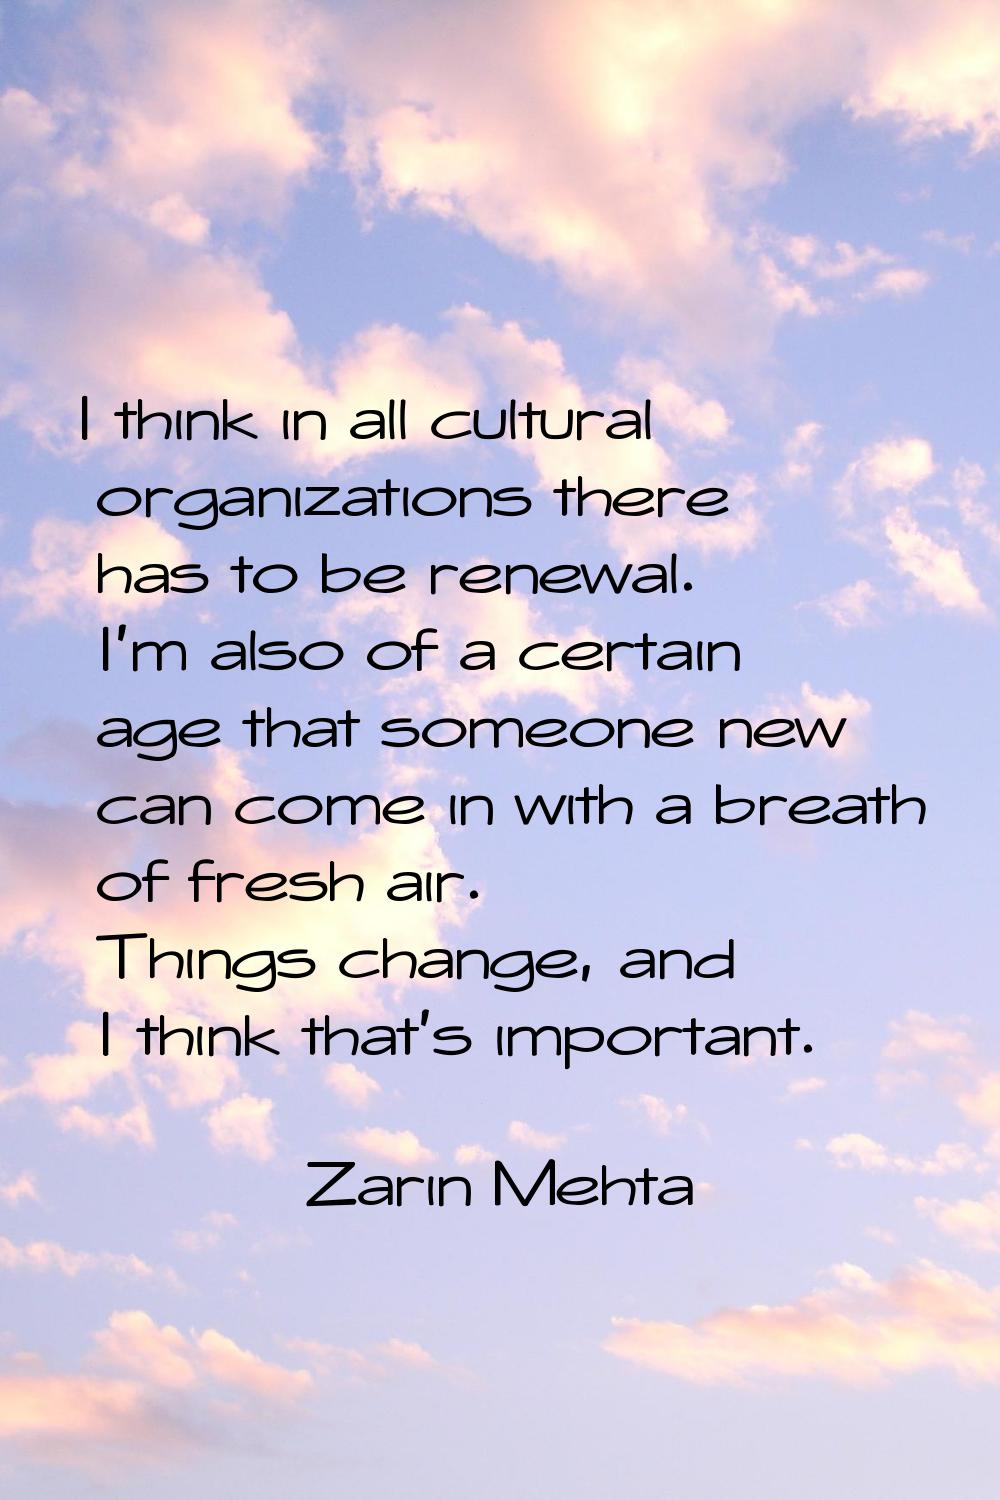 I think in all cultural organizations there has to be renewal. I'm also of a certain age that someo